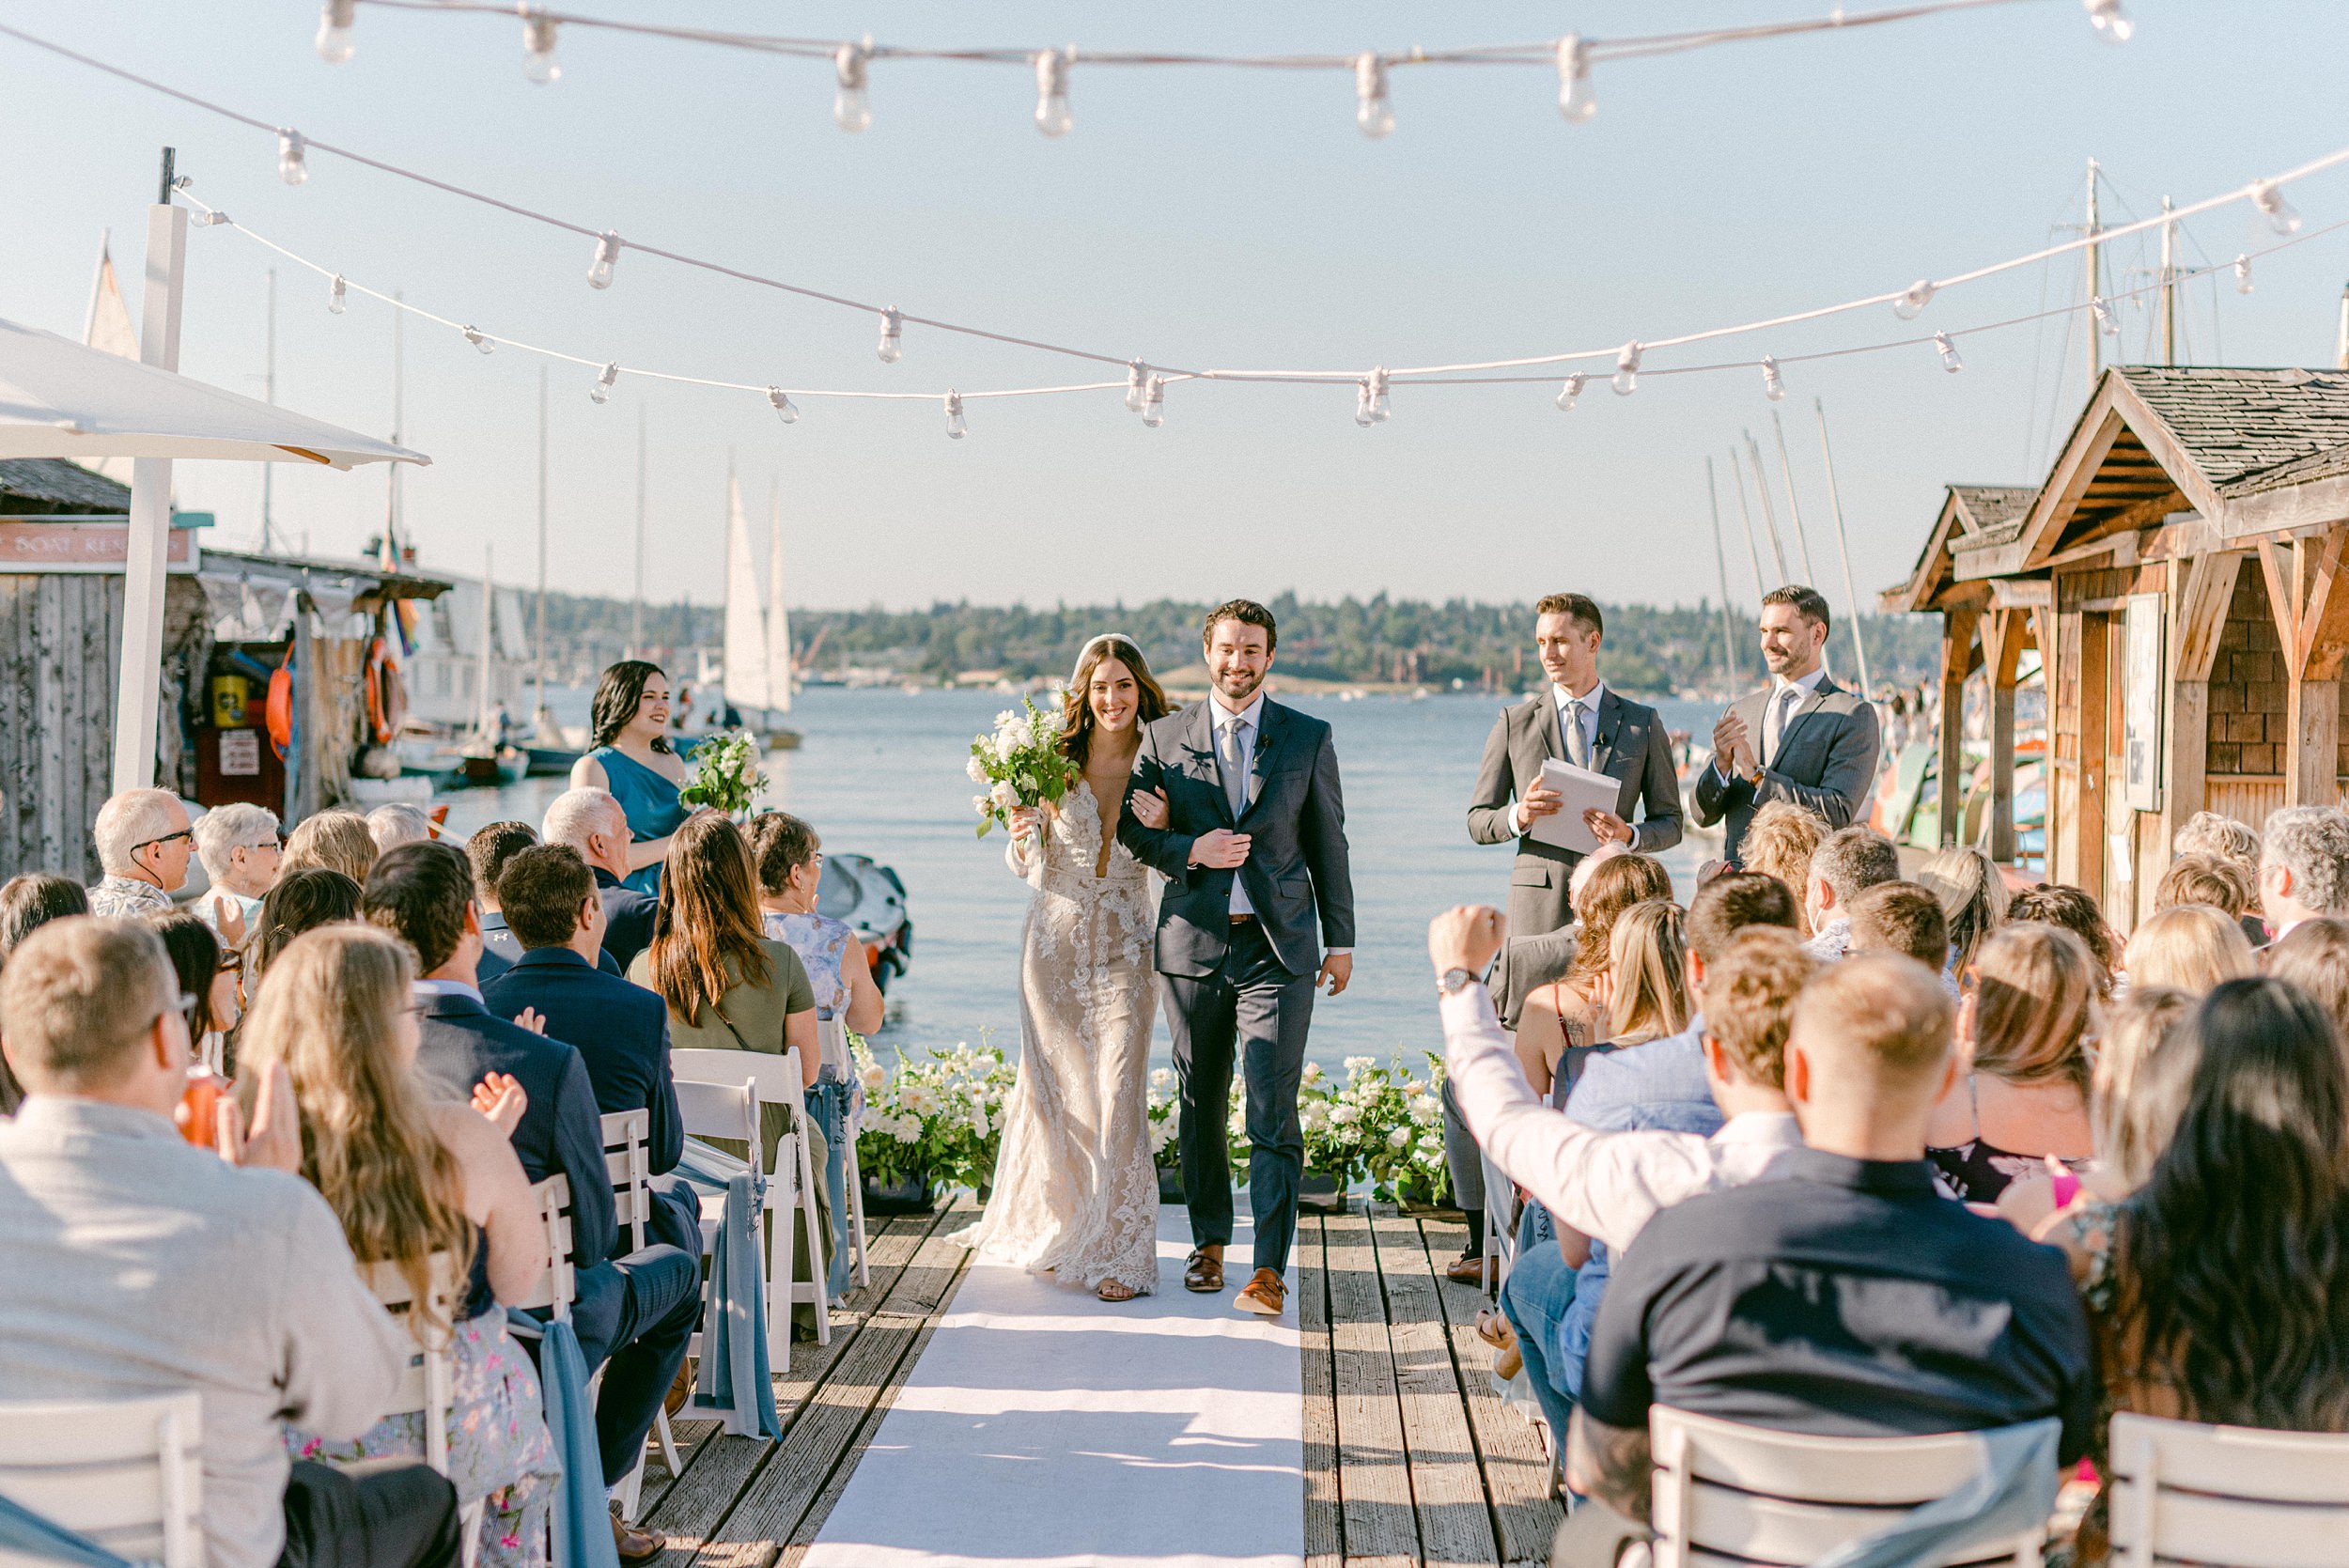 Fine Art Weddings in Seattle, Washington. The Center for Wooden Boats. Bride and Groom at the end of their ceremony, walking down the aisle, while their guests cheer and clap for them. Water rippling in the background with boats here and there.